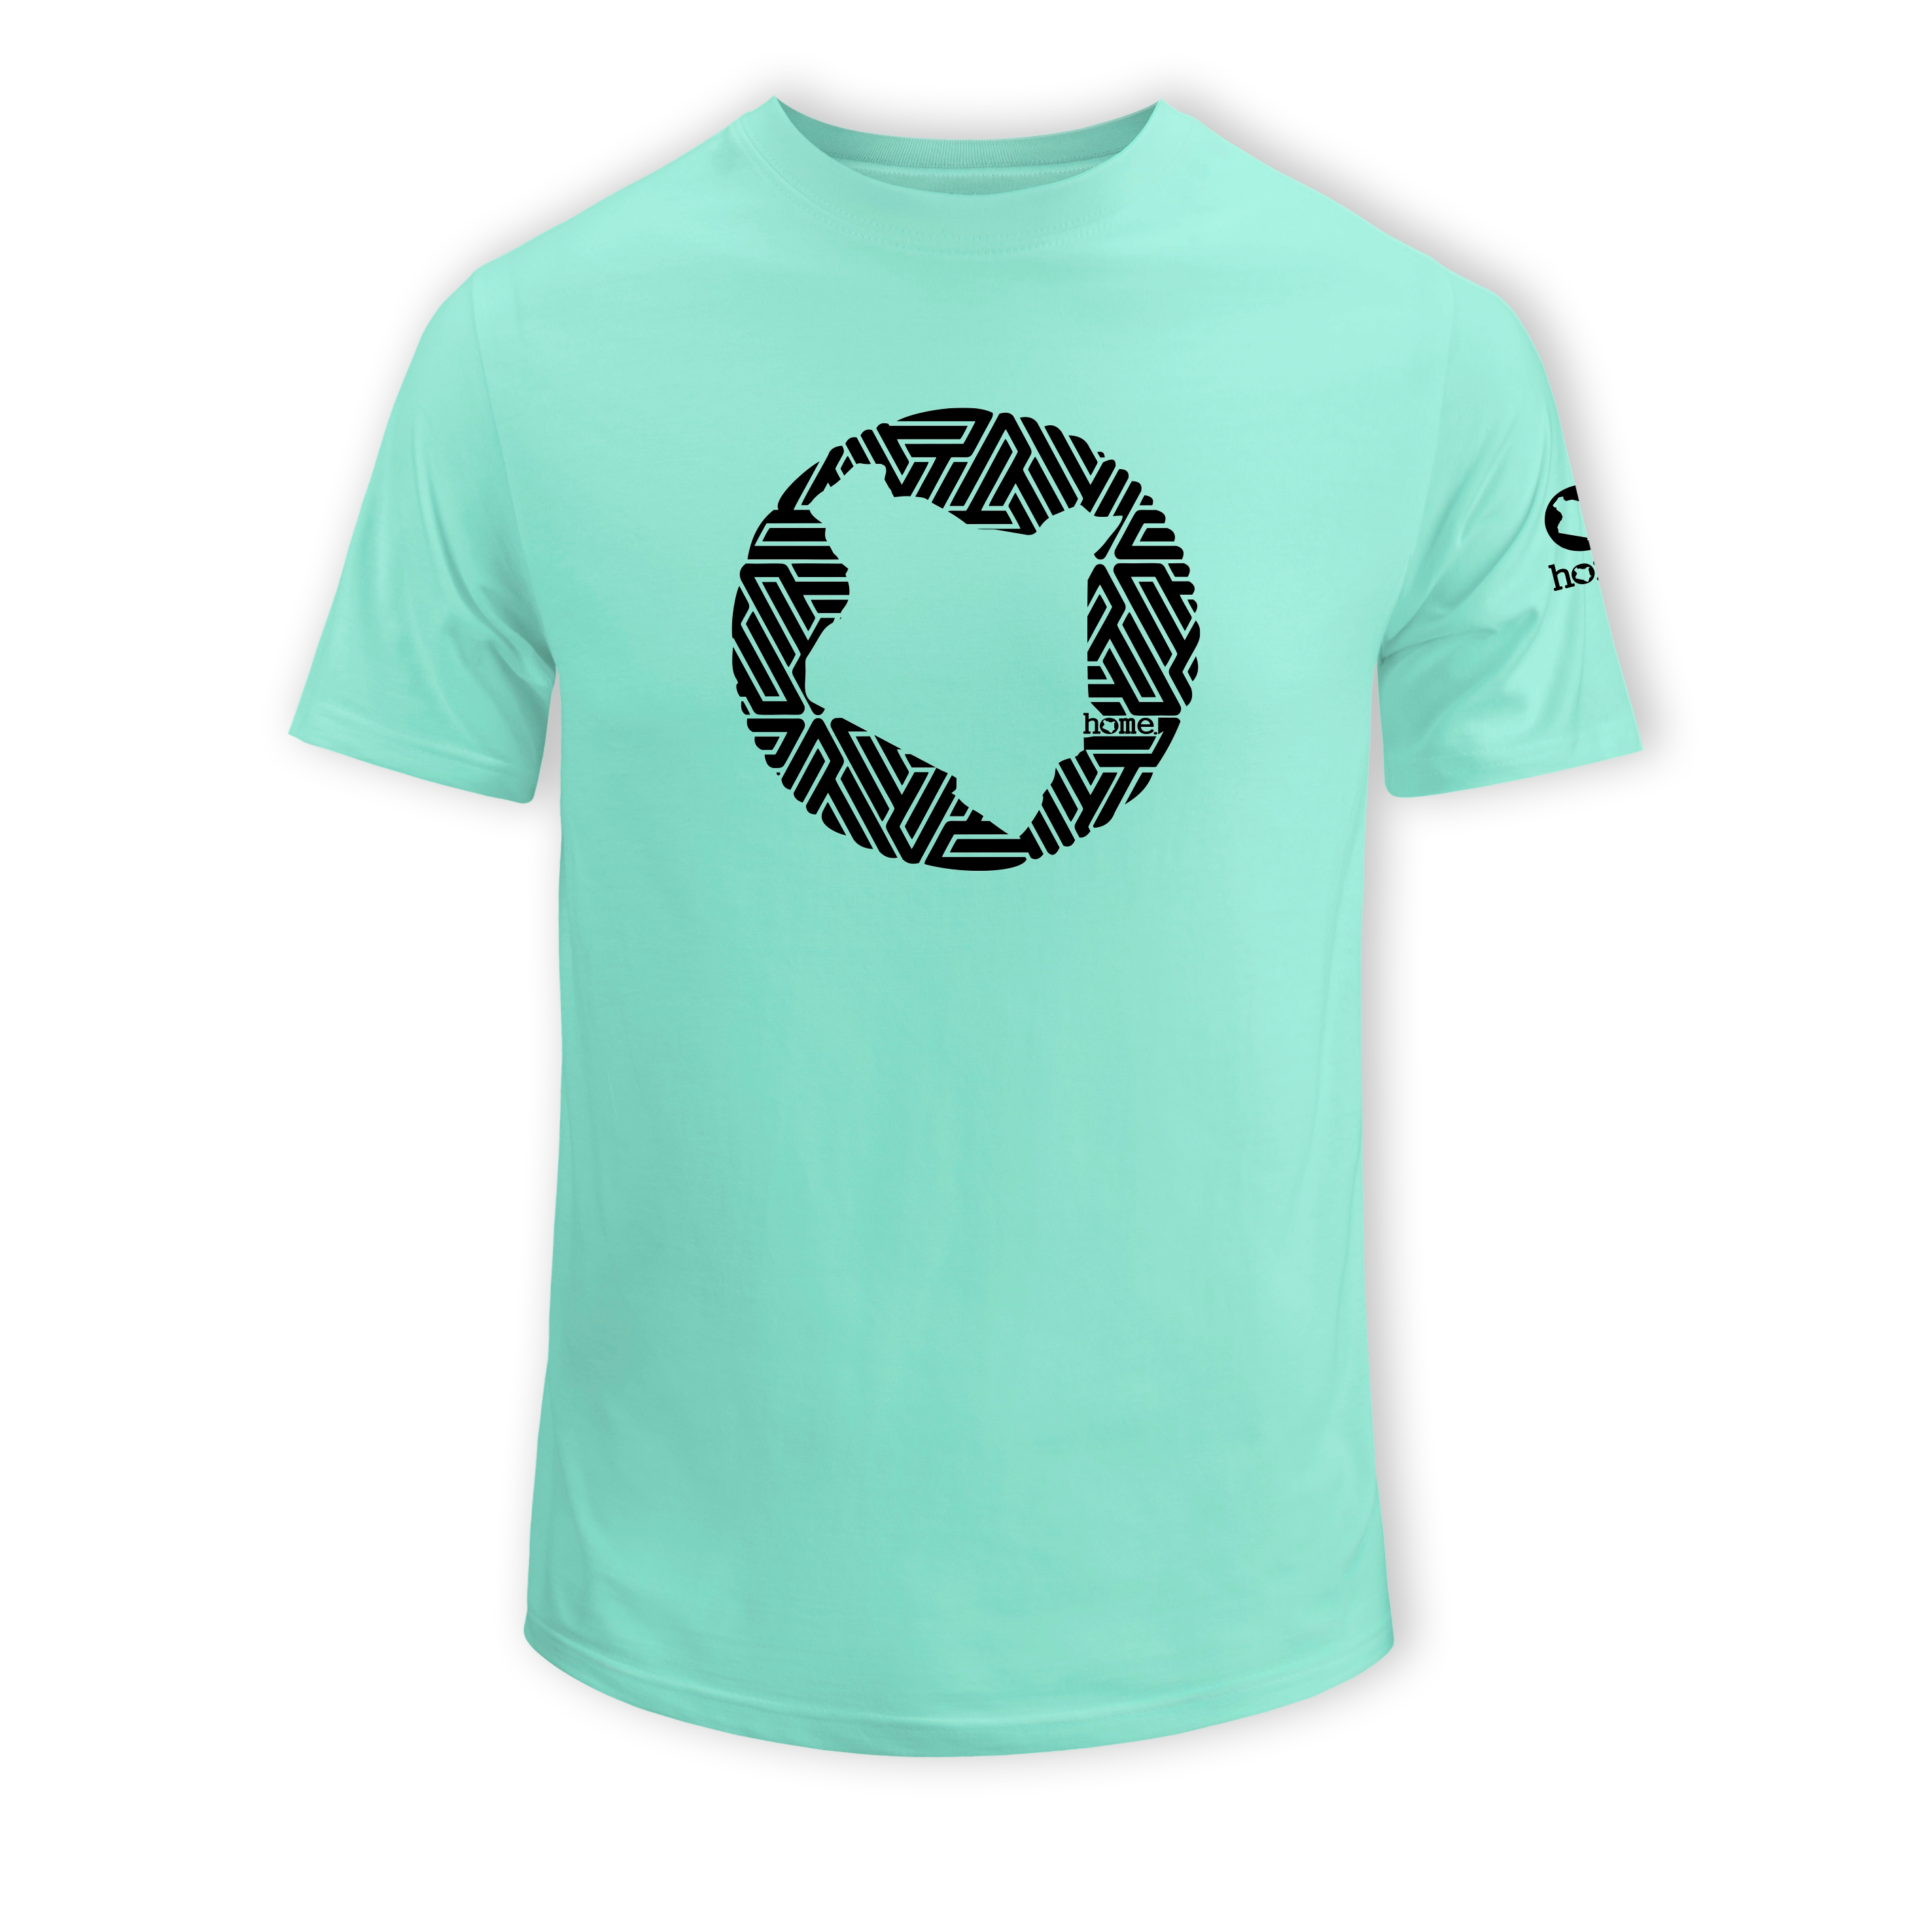 home_254 KIDS SHORT-SLEEVED TURQUOISE GREEN T-SHIRT WITH A BLACK MAP PRINT – COTTON PLUS FABRIC